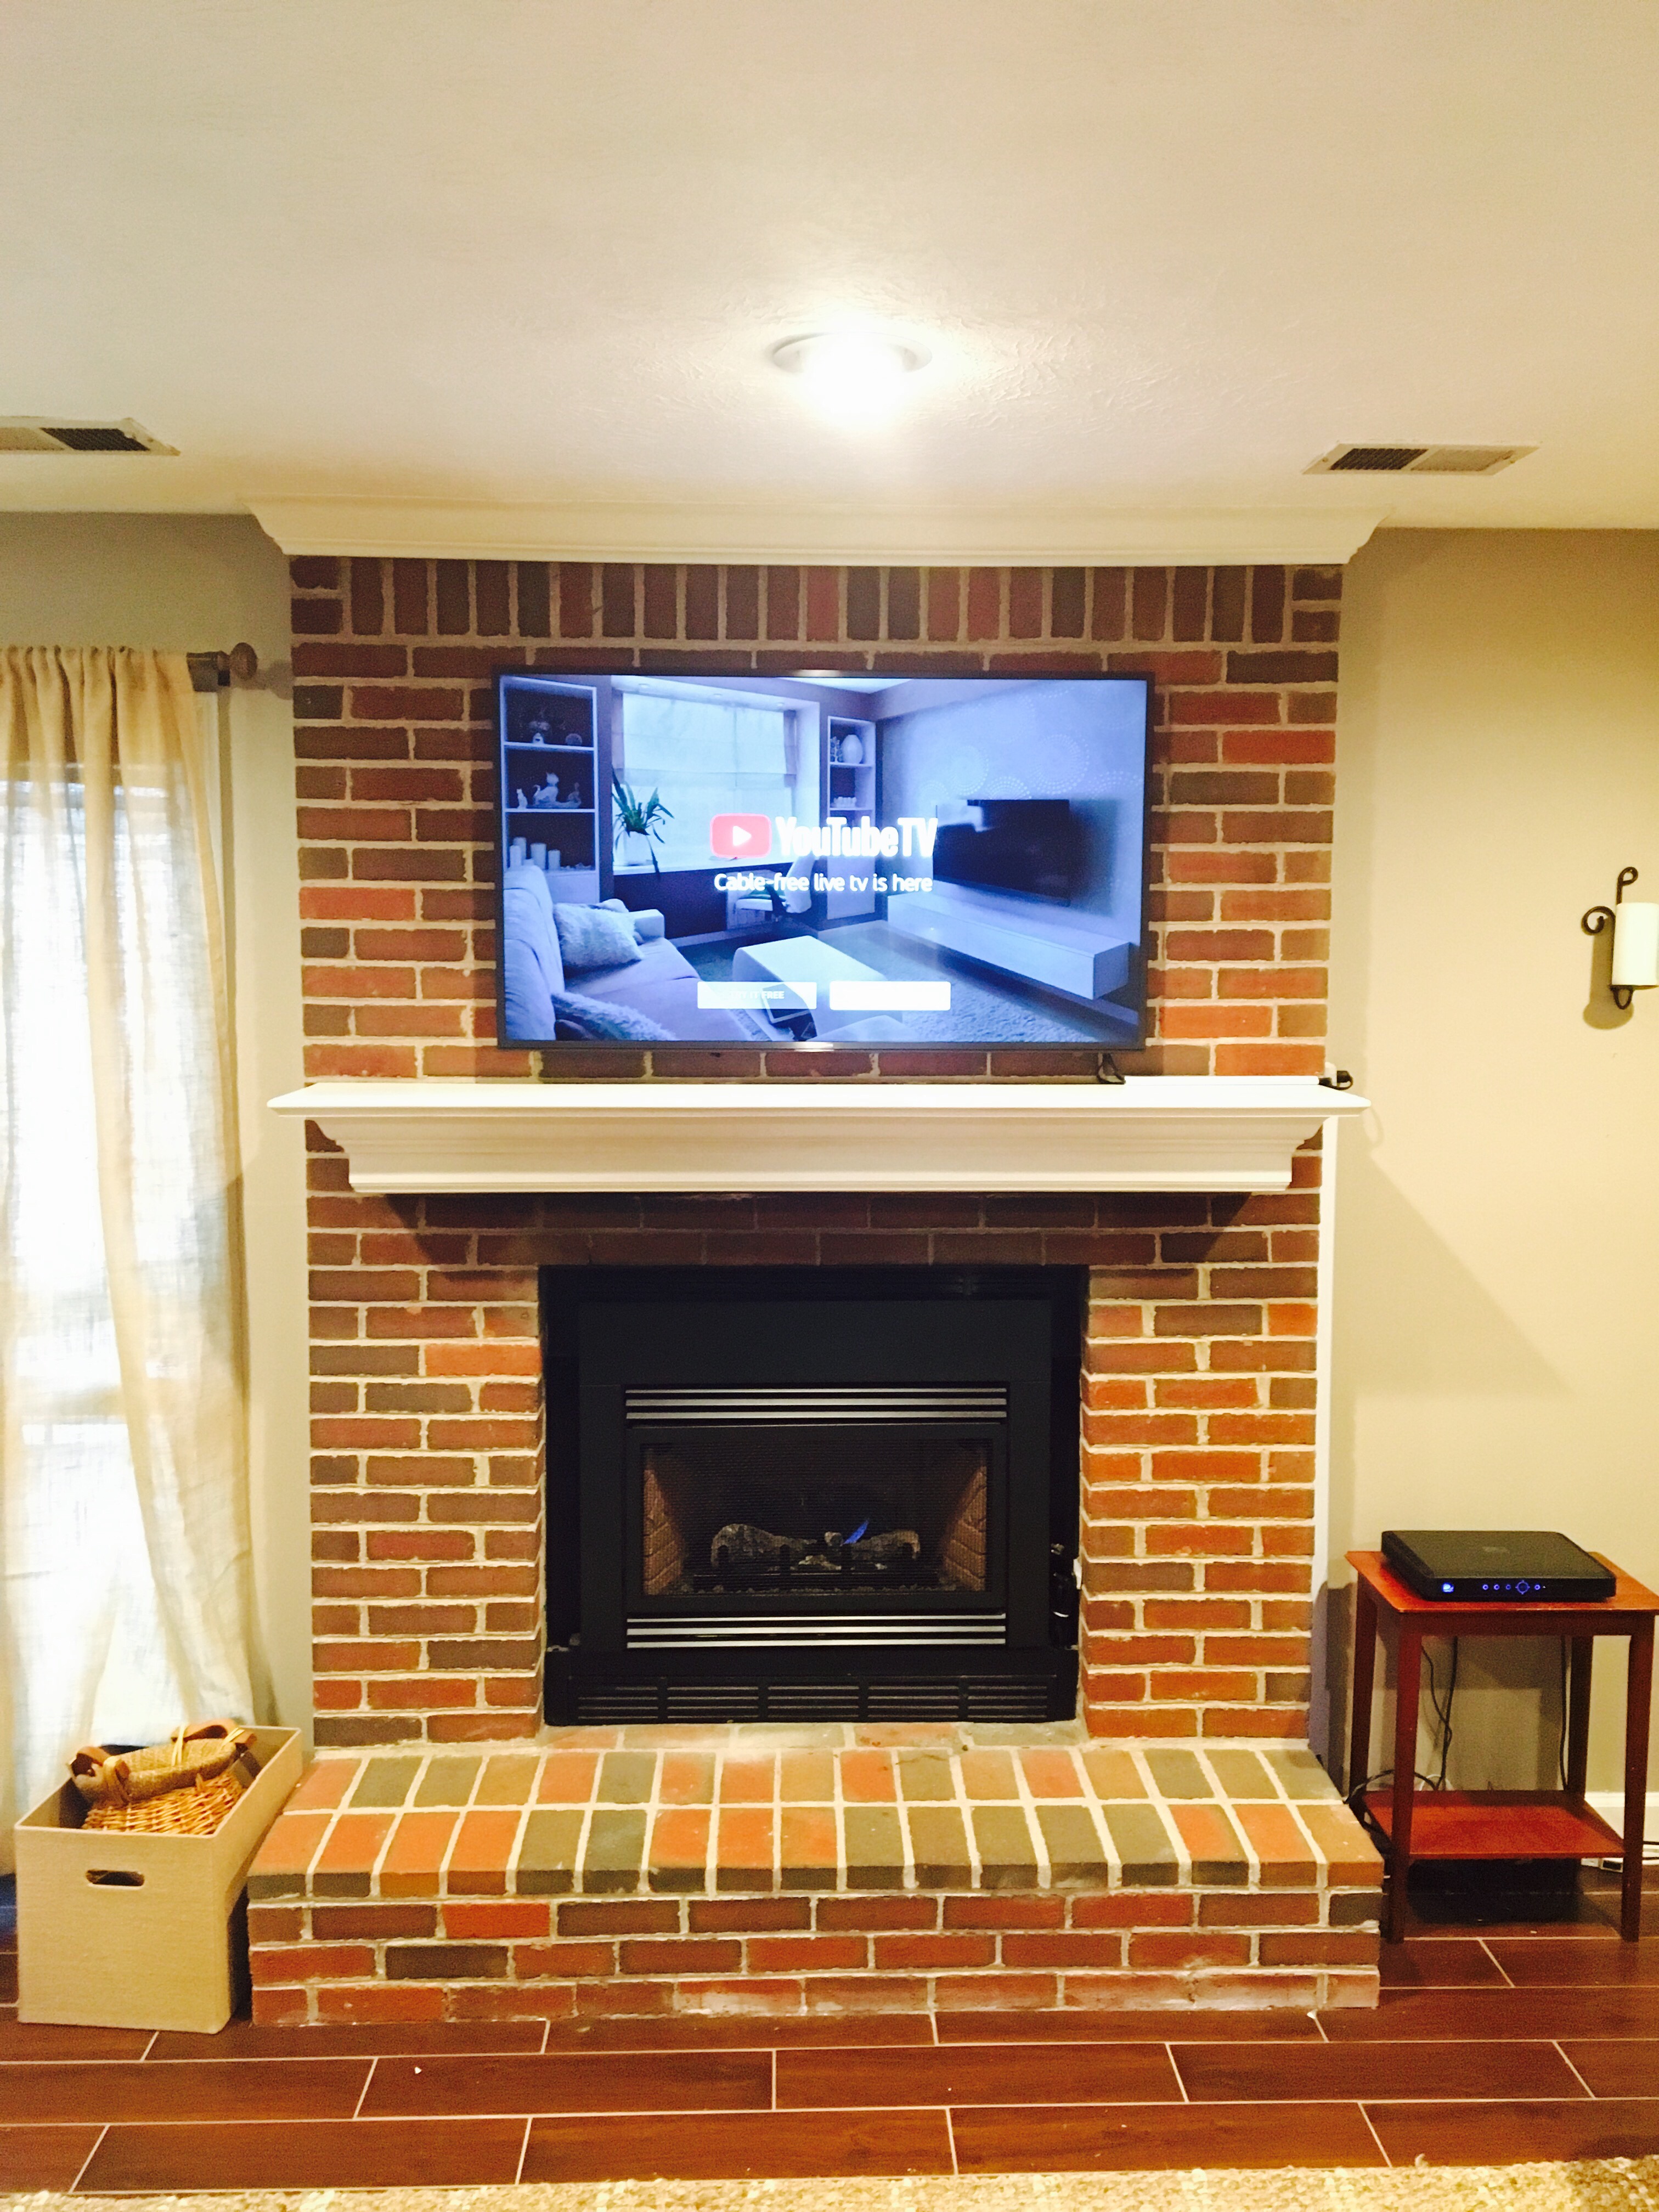 Tv Mounted On A Brick Fireplace In, Install Flat Screen On Brick Fireplace